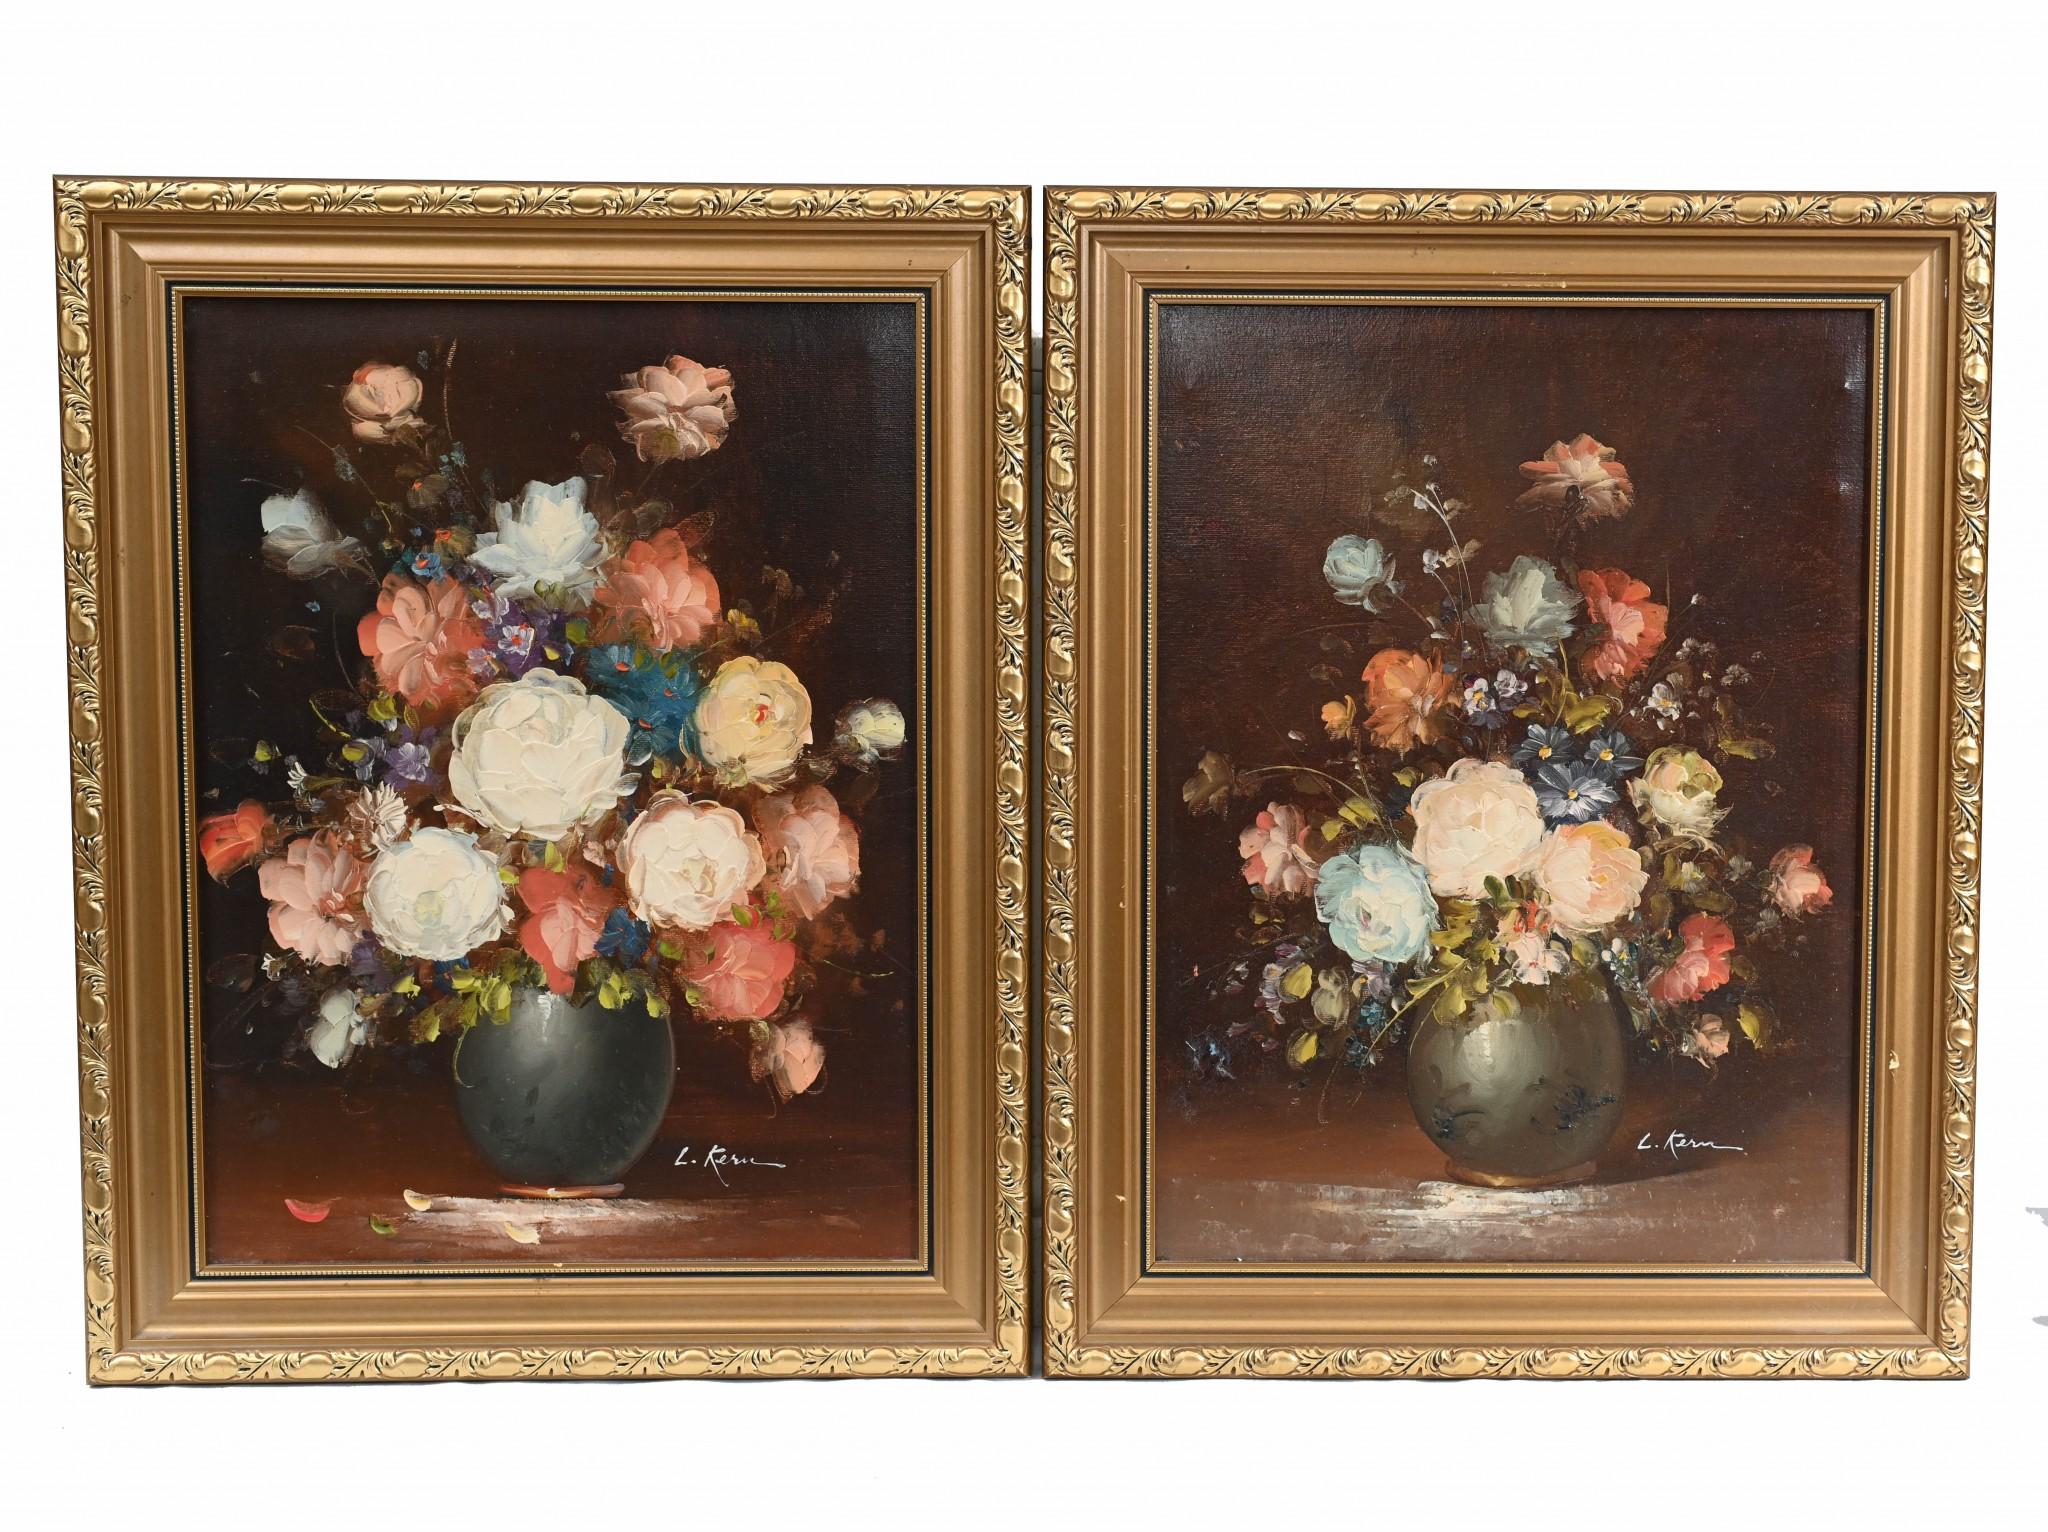 Delightful pair of matching French oil paintings 
Very colourful pair of floral still lives with vivid flowers
Ready to add light and energy to any room
Very detailed brushwork, the work of a talented artist
Bought from a dealer on Marche Biron at